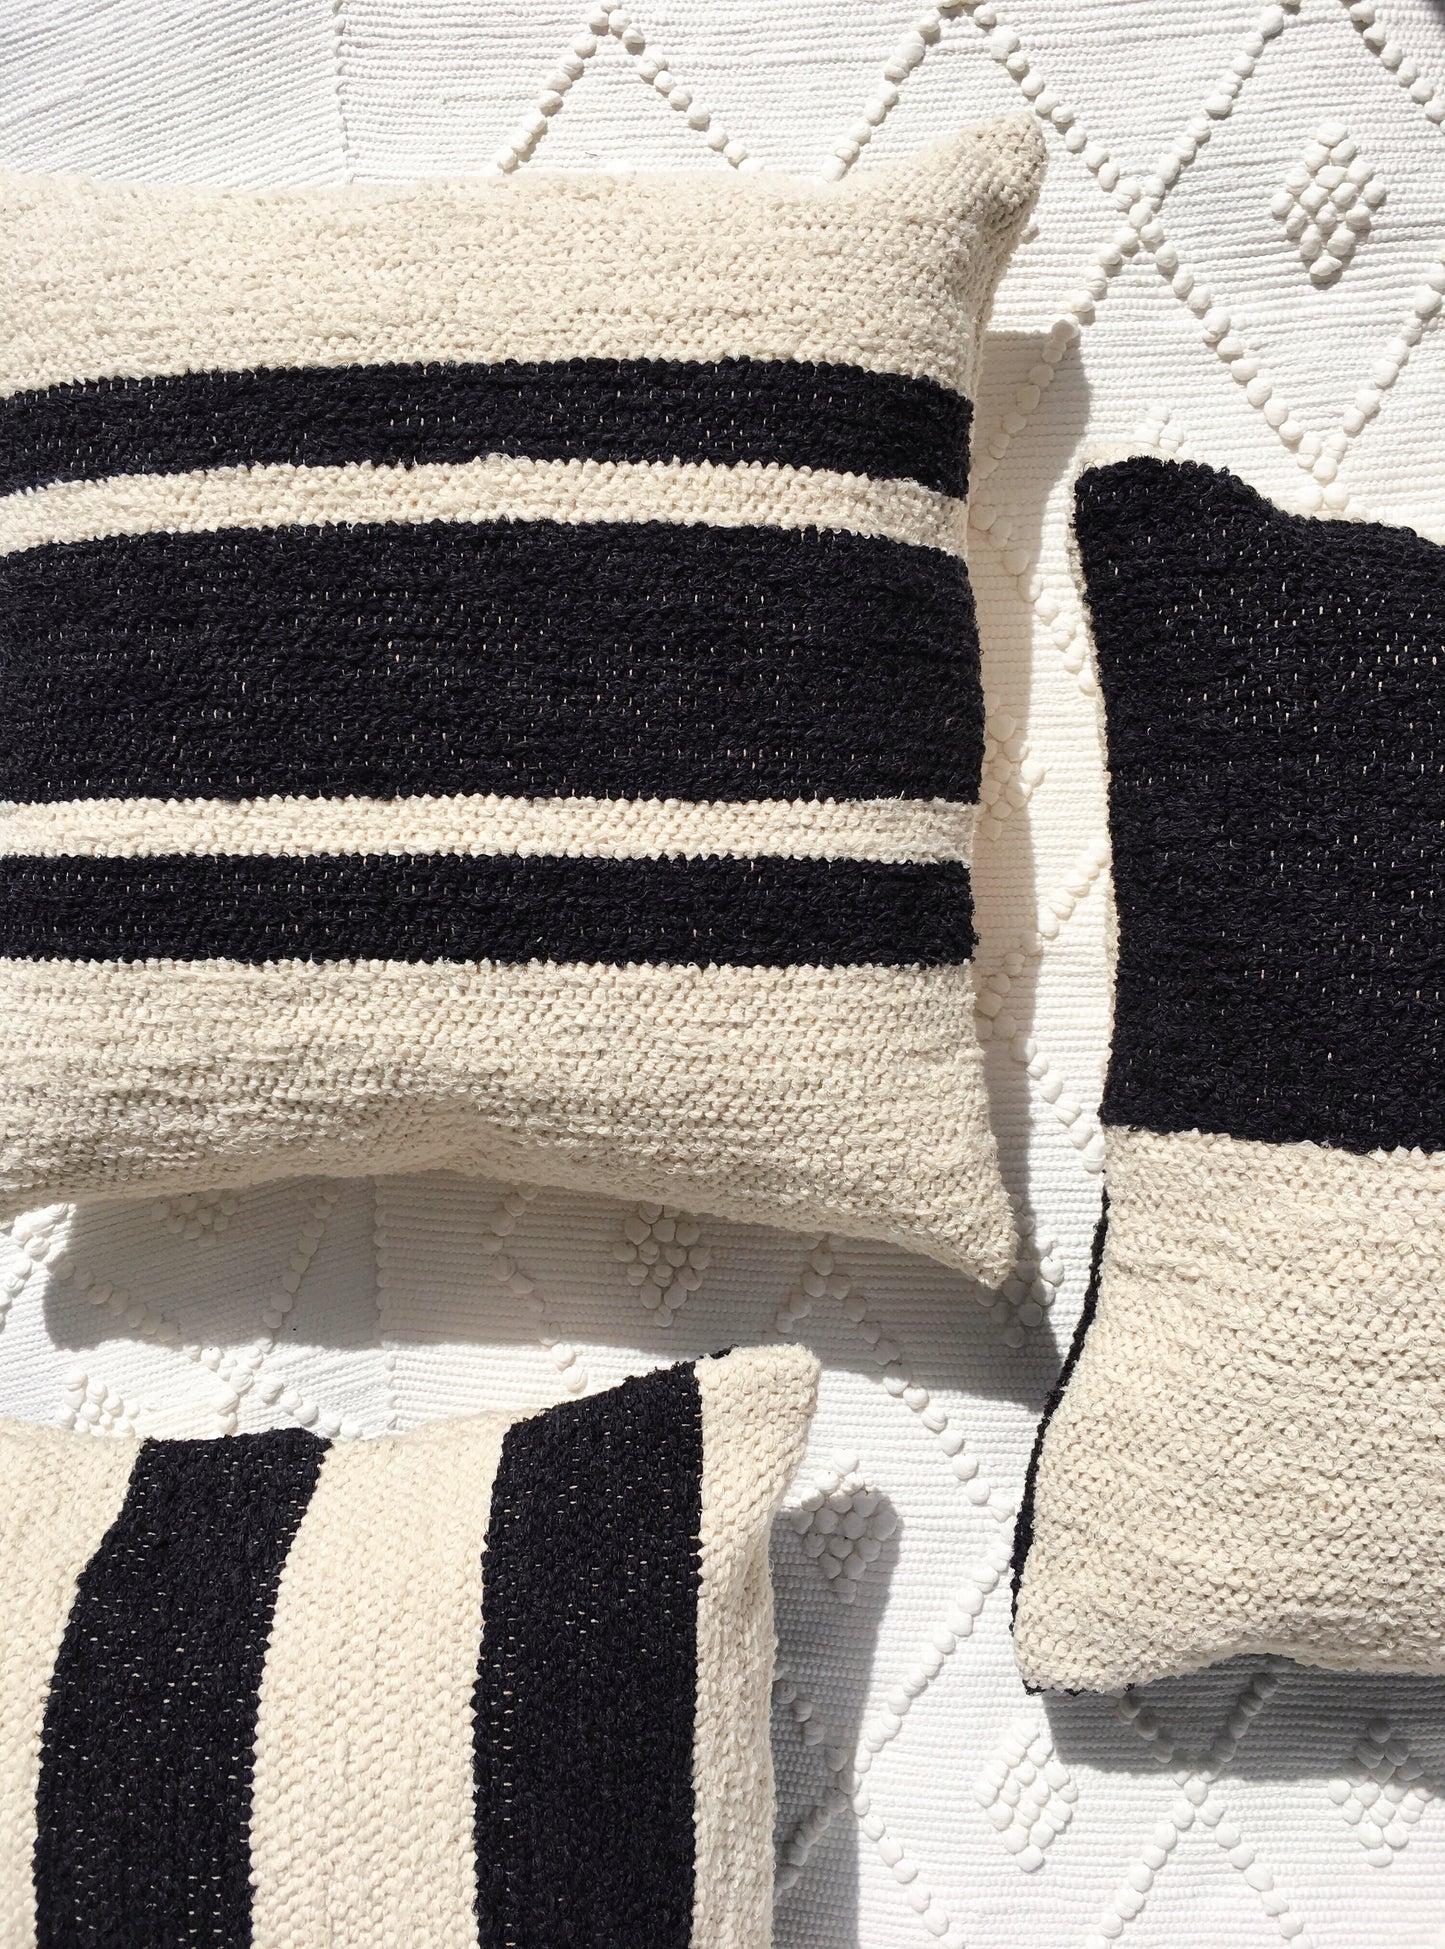 Handwoven cotton pillows black and white B&W